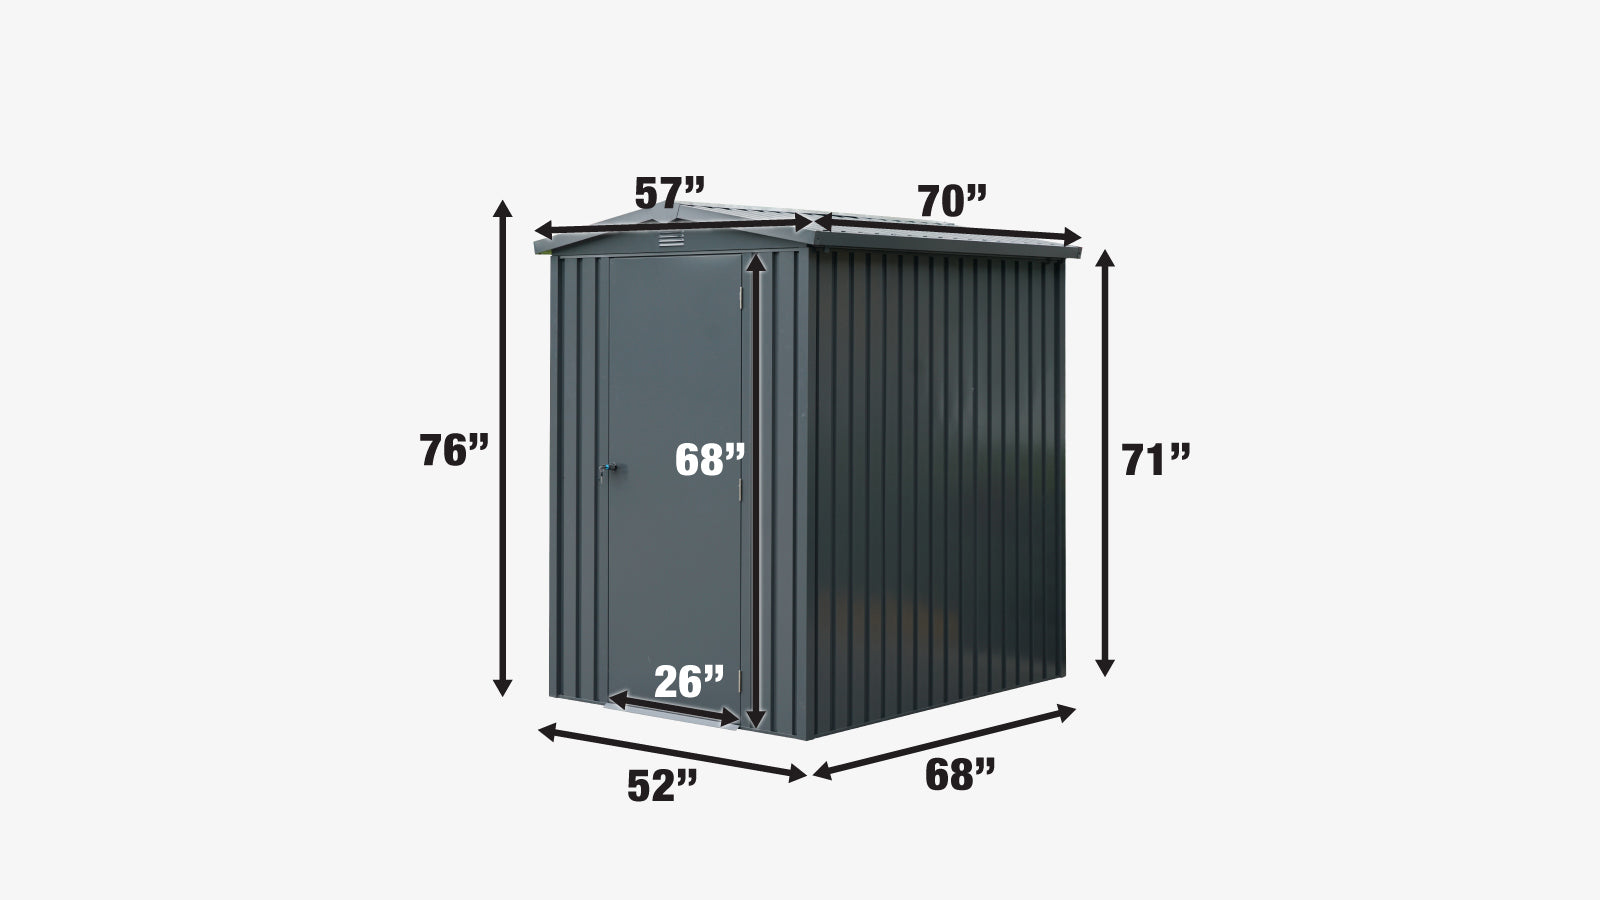 TMG Industrial 5 x 6 FT Apex Roof Metal Shed Pro Series, Galvanized corrugated metal, Apex roof design, Two air vents,  TMG-MS0506-specifications-image